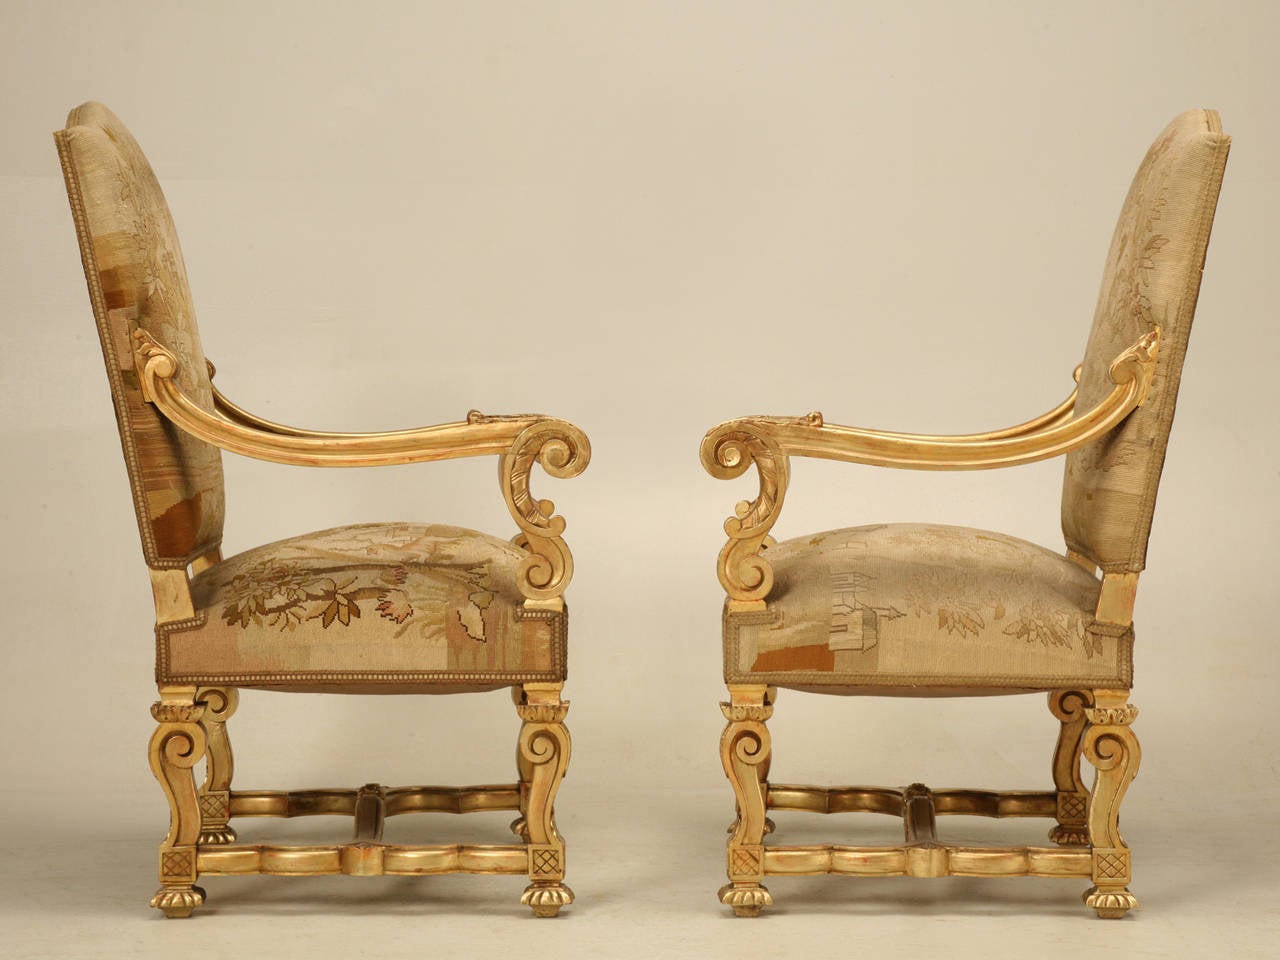 Early 20th Century Antique French Gilded Throne Chairs, circa 1900